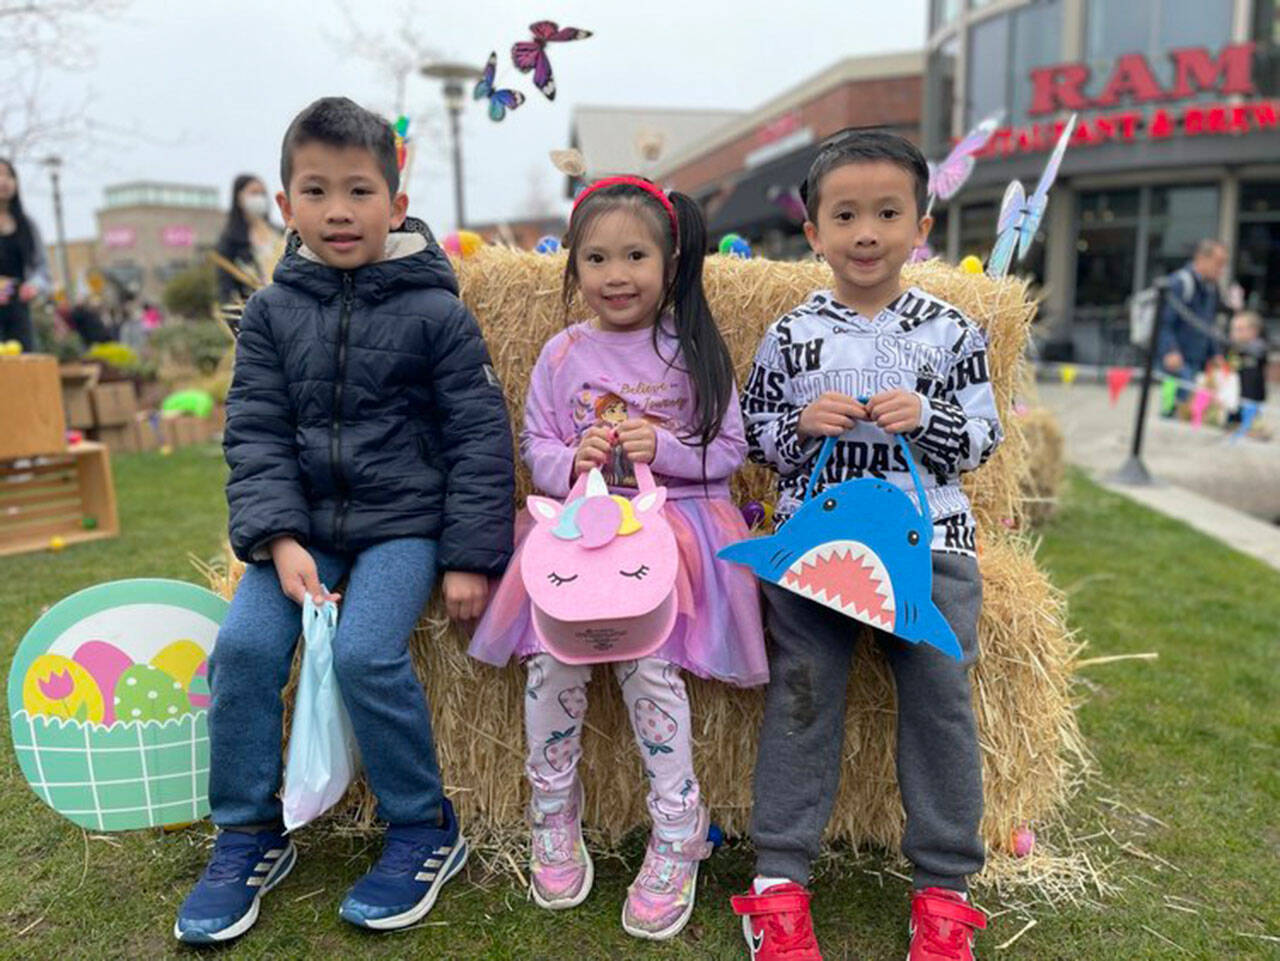 Kent Station shopping center will host an Easter Egg Hunt from 11 a.m to 1 p.m. on Saturday, March 30. COURTESY PHOTO, Kent Station